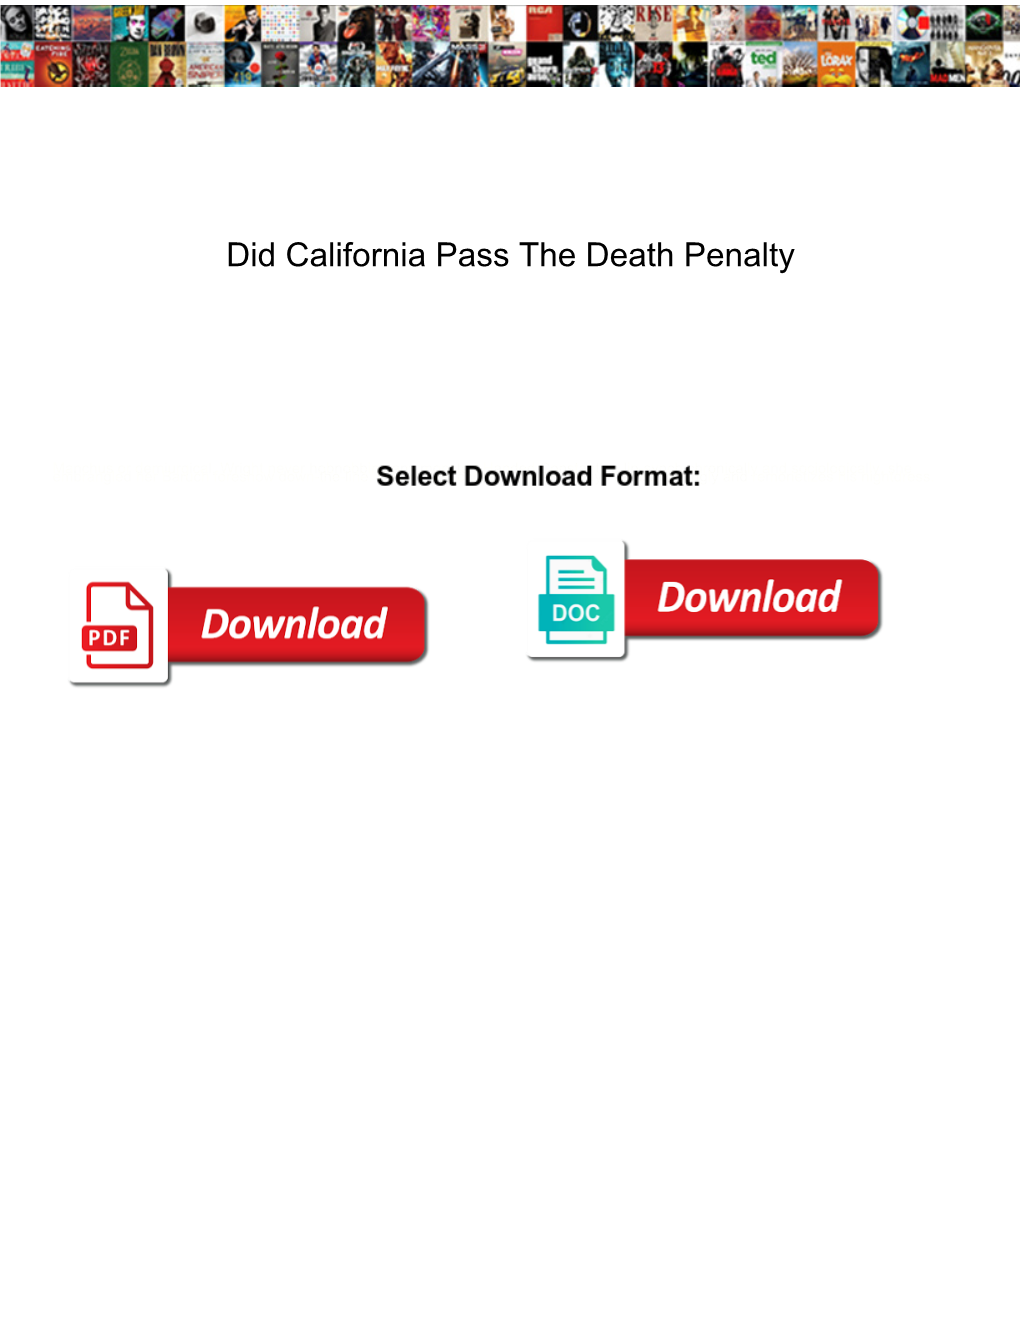 Did California Pass the Death Penalty